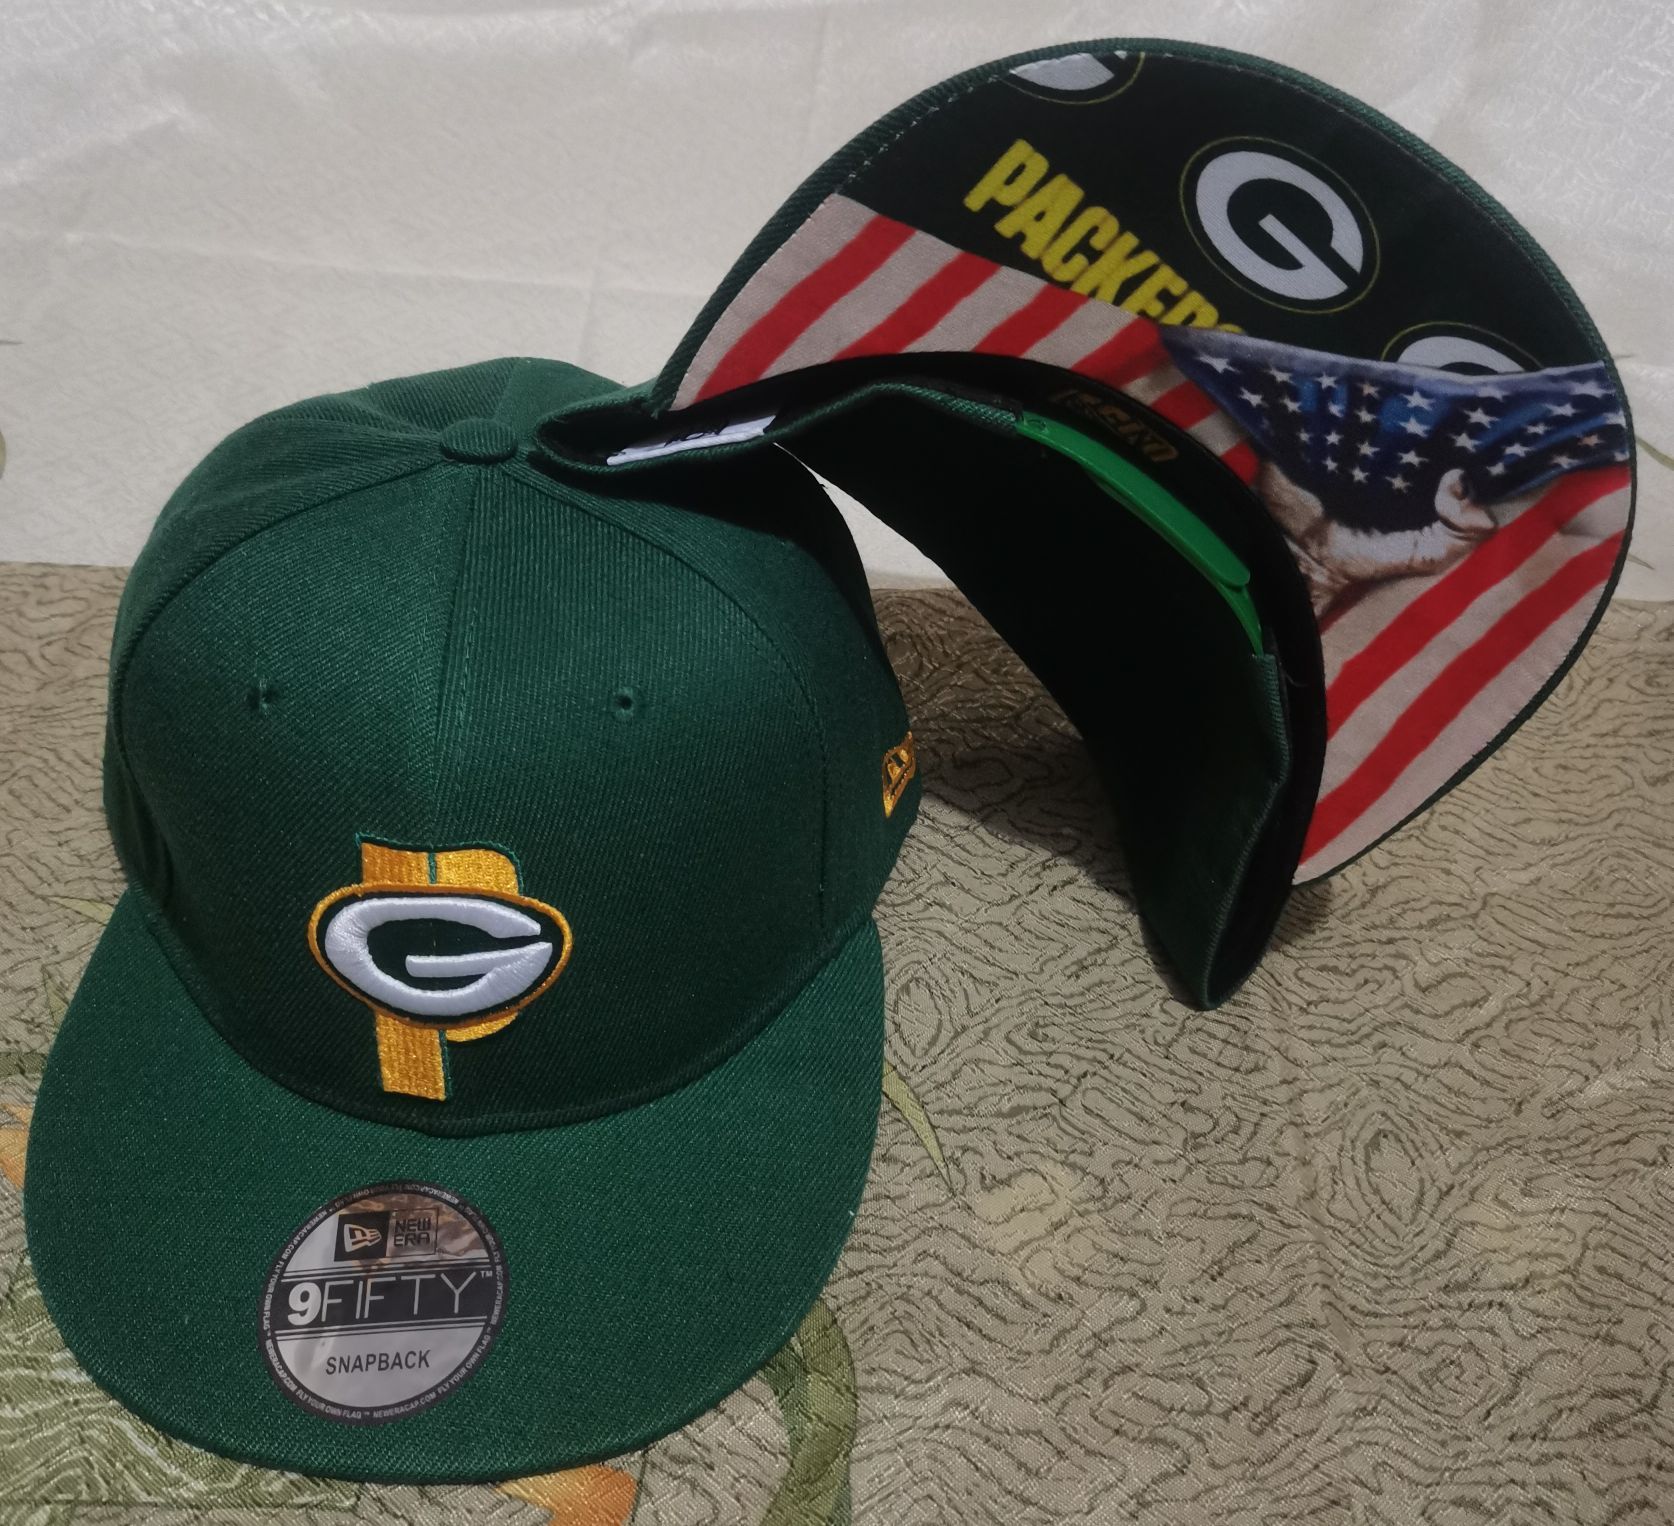 2021 NFL Green Bay Packers #9 hat